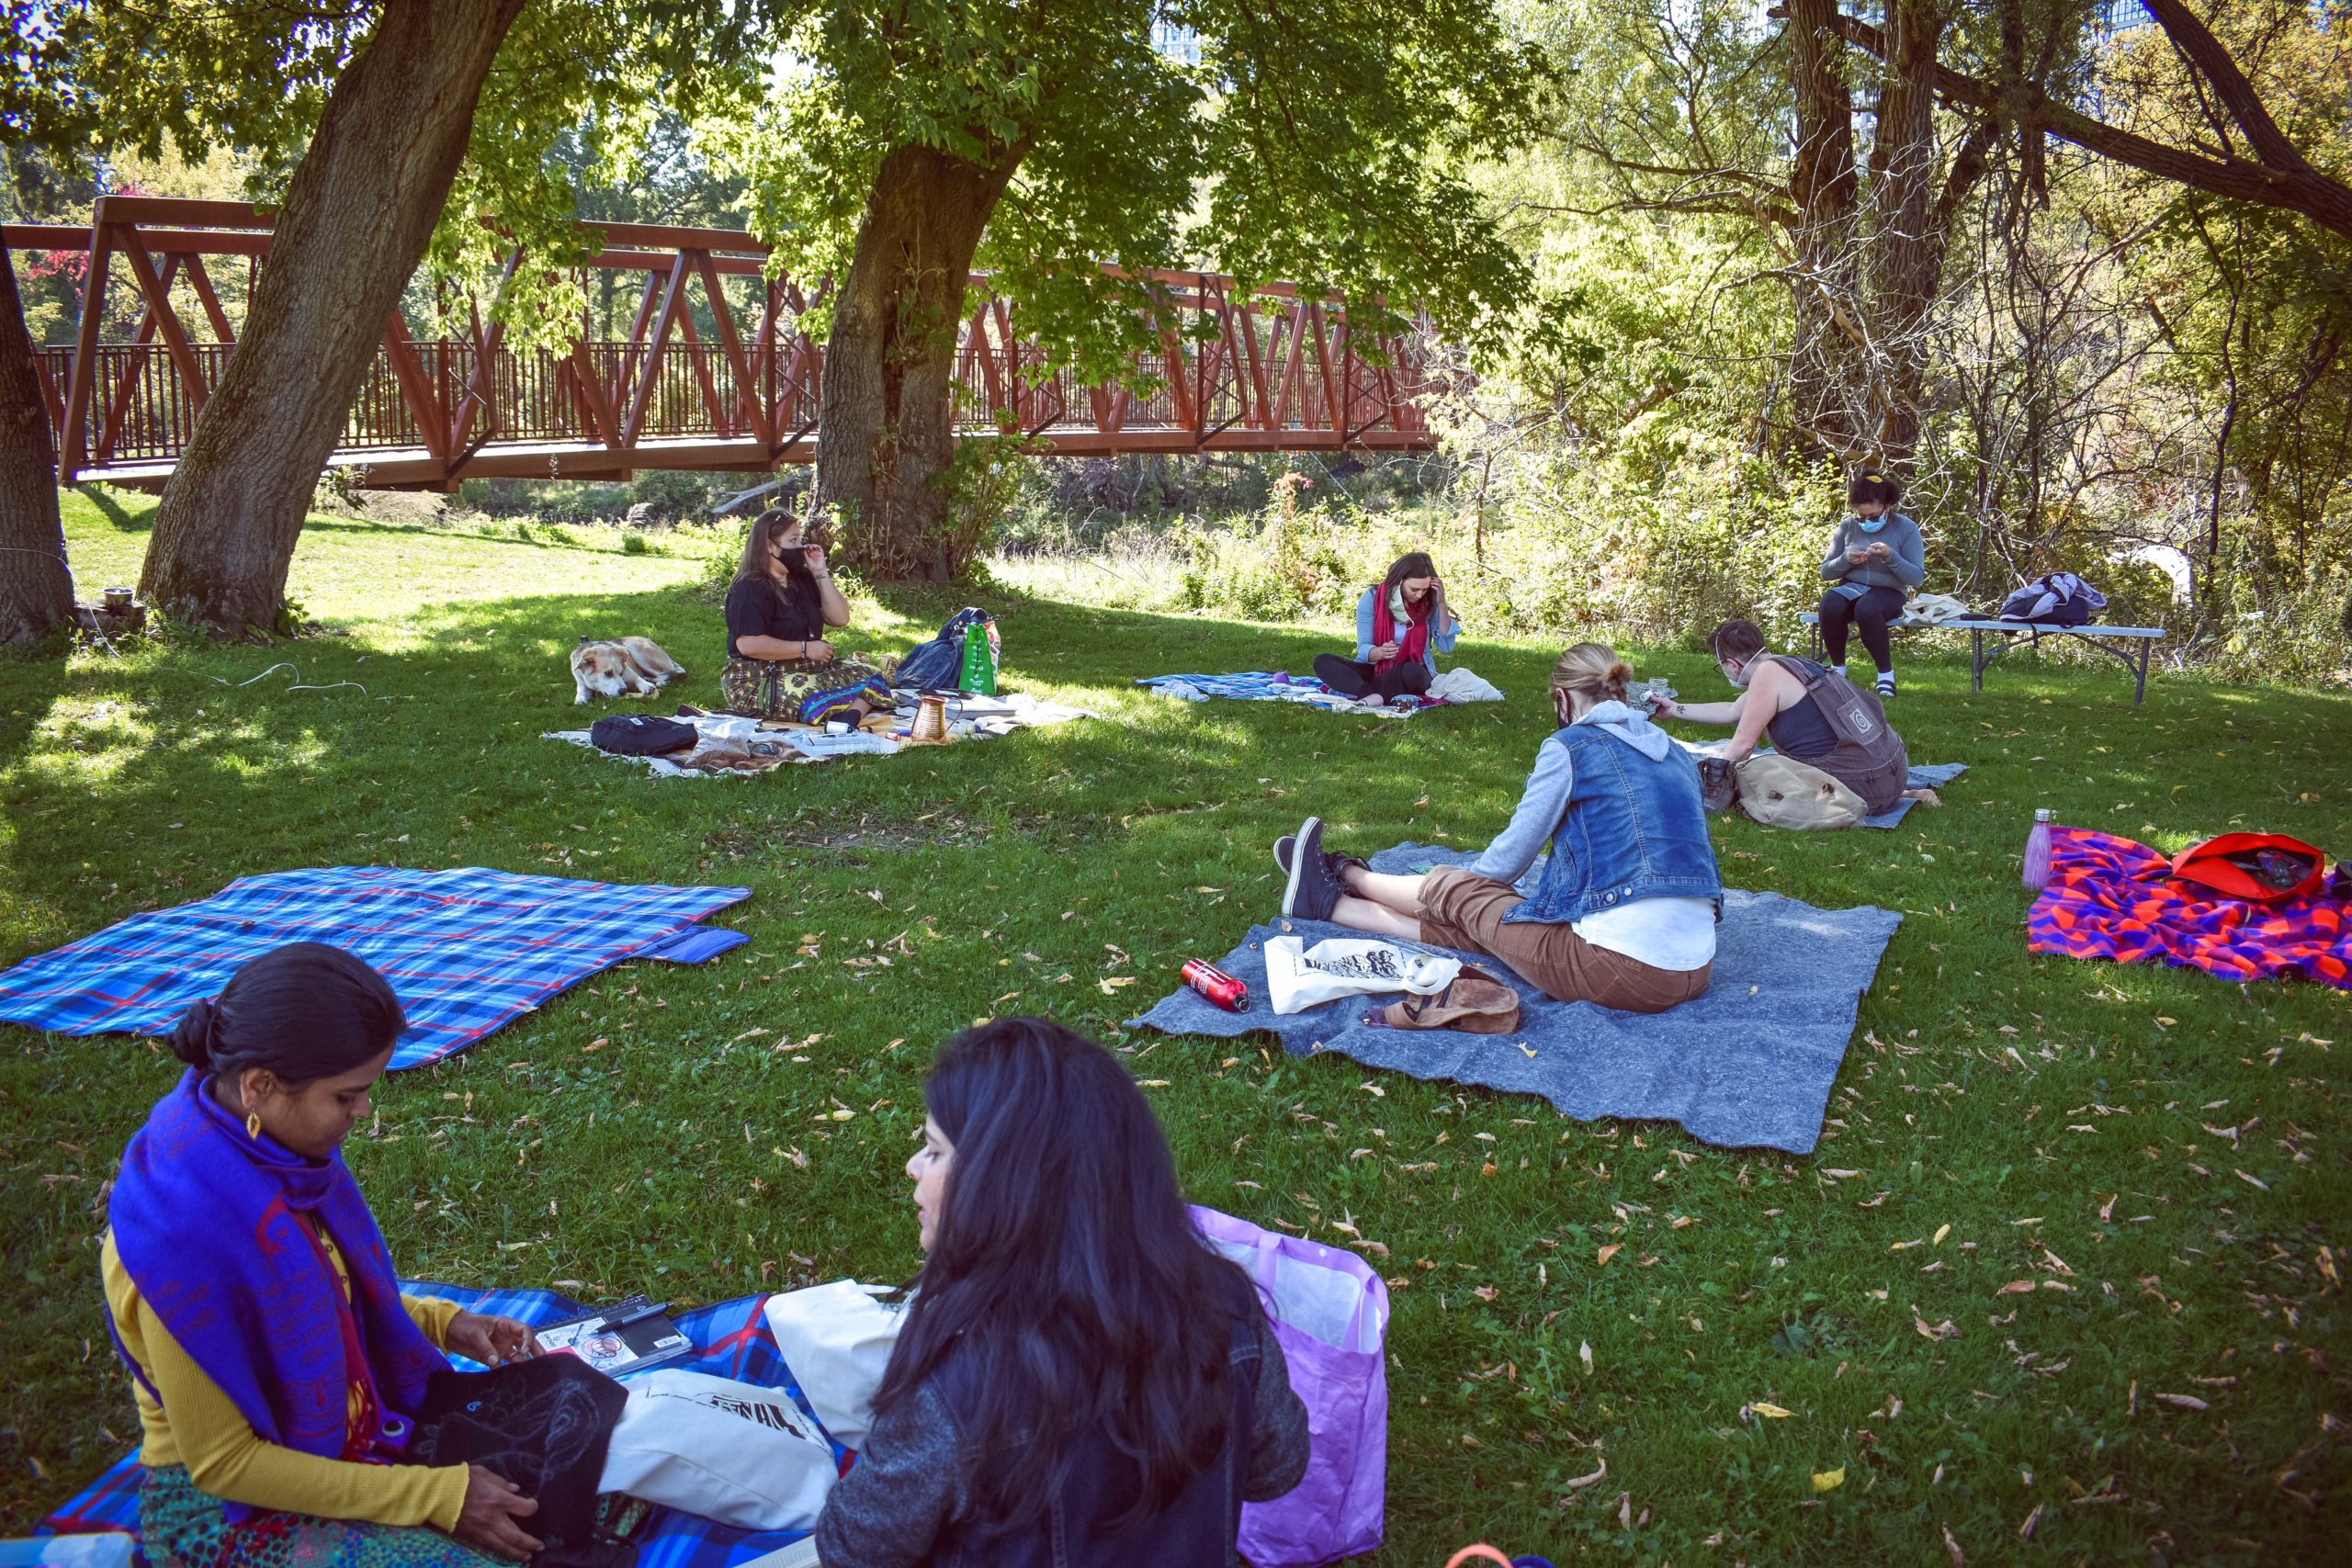 Photo of the Restoration of Relationship beading workshop, participants are sitting distant on their own picnic blankets on the grass. In the background there is foliages, trees and a bridge.